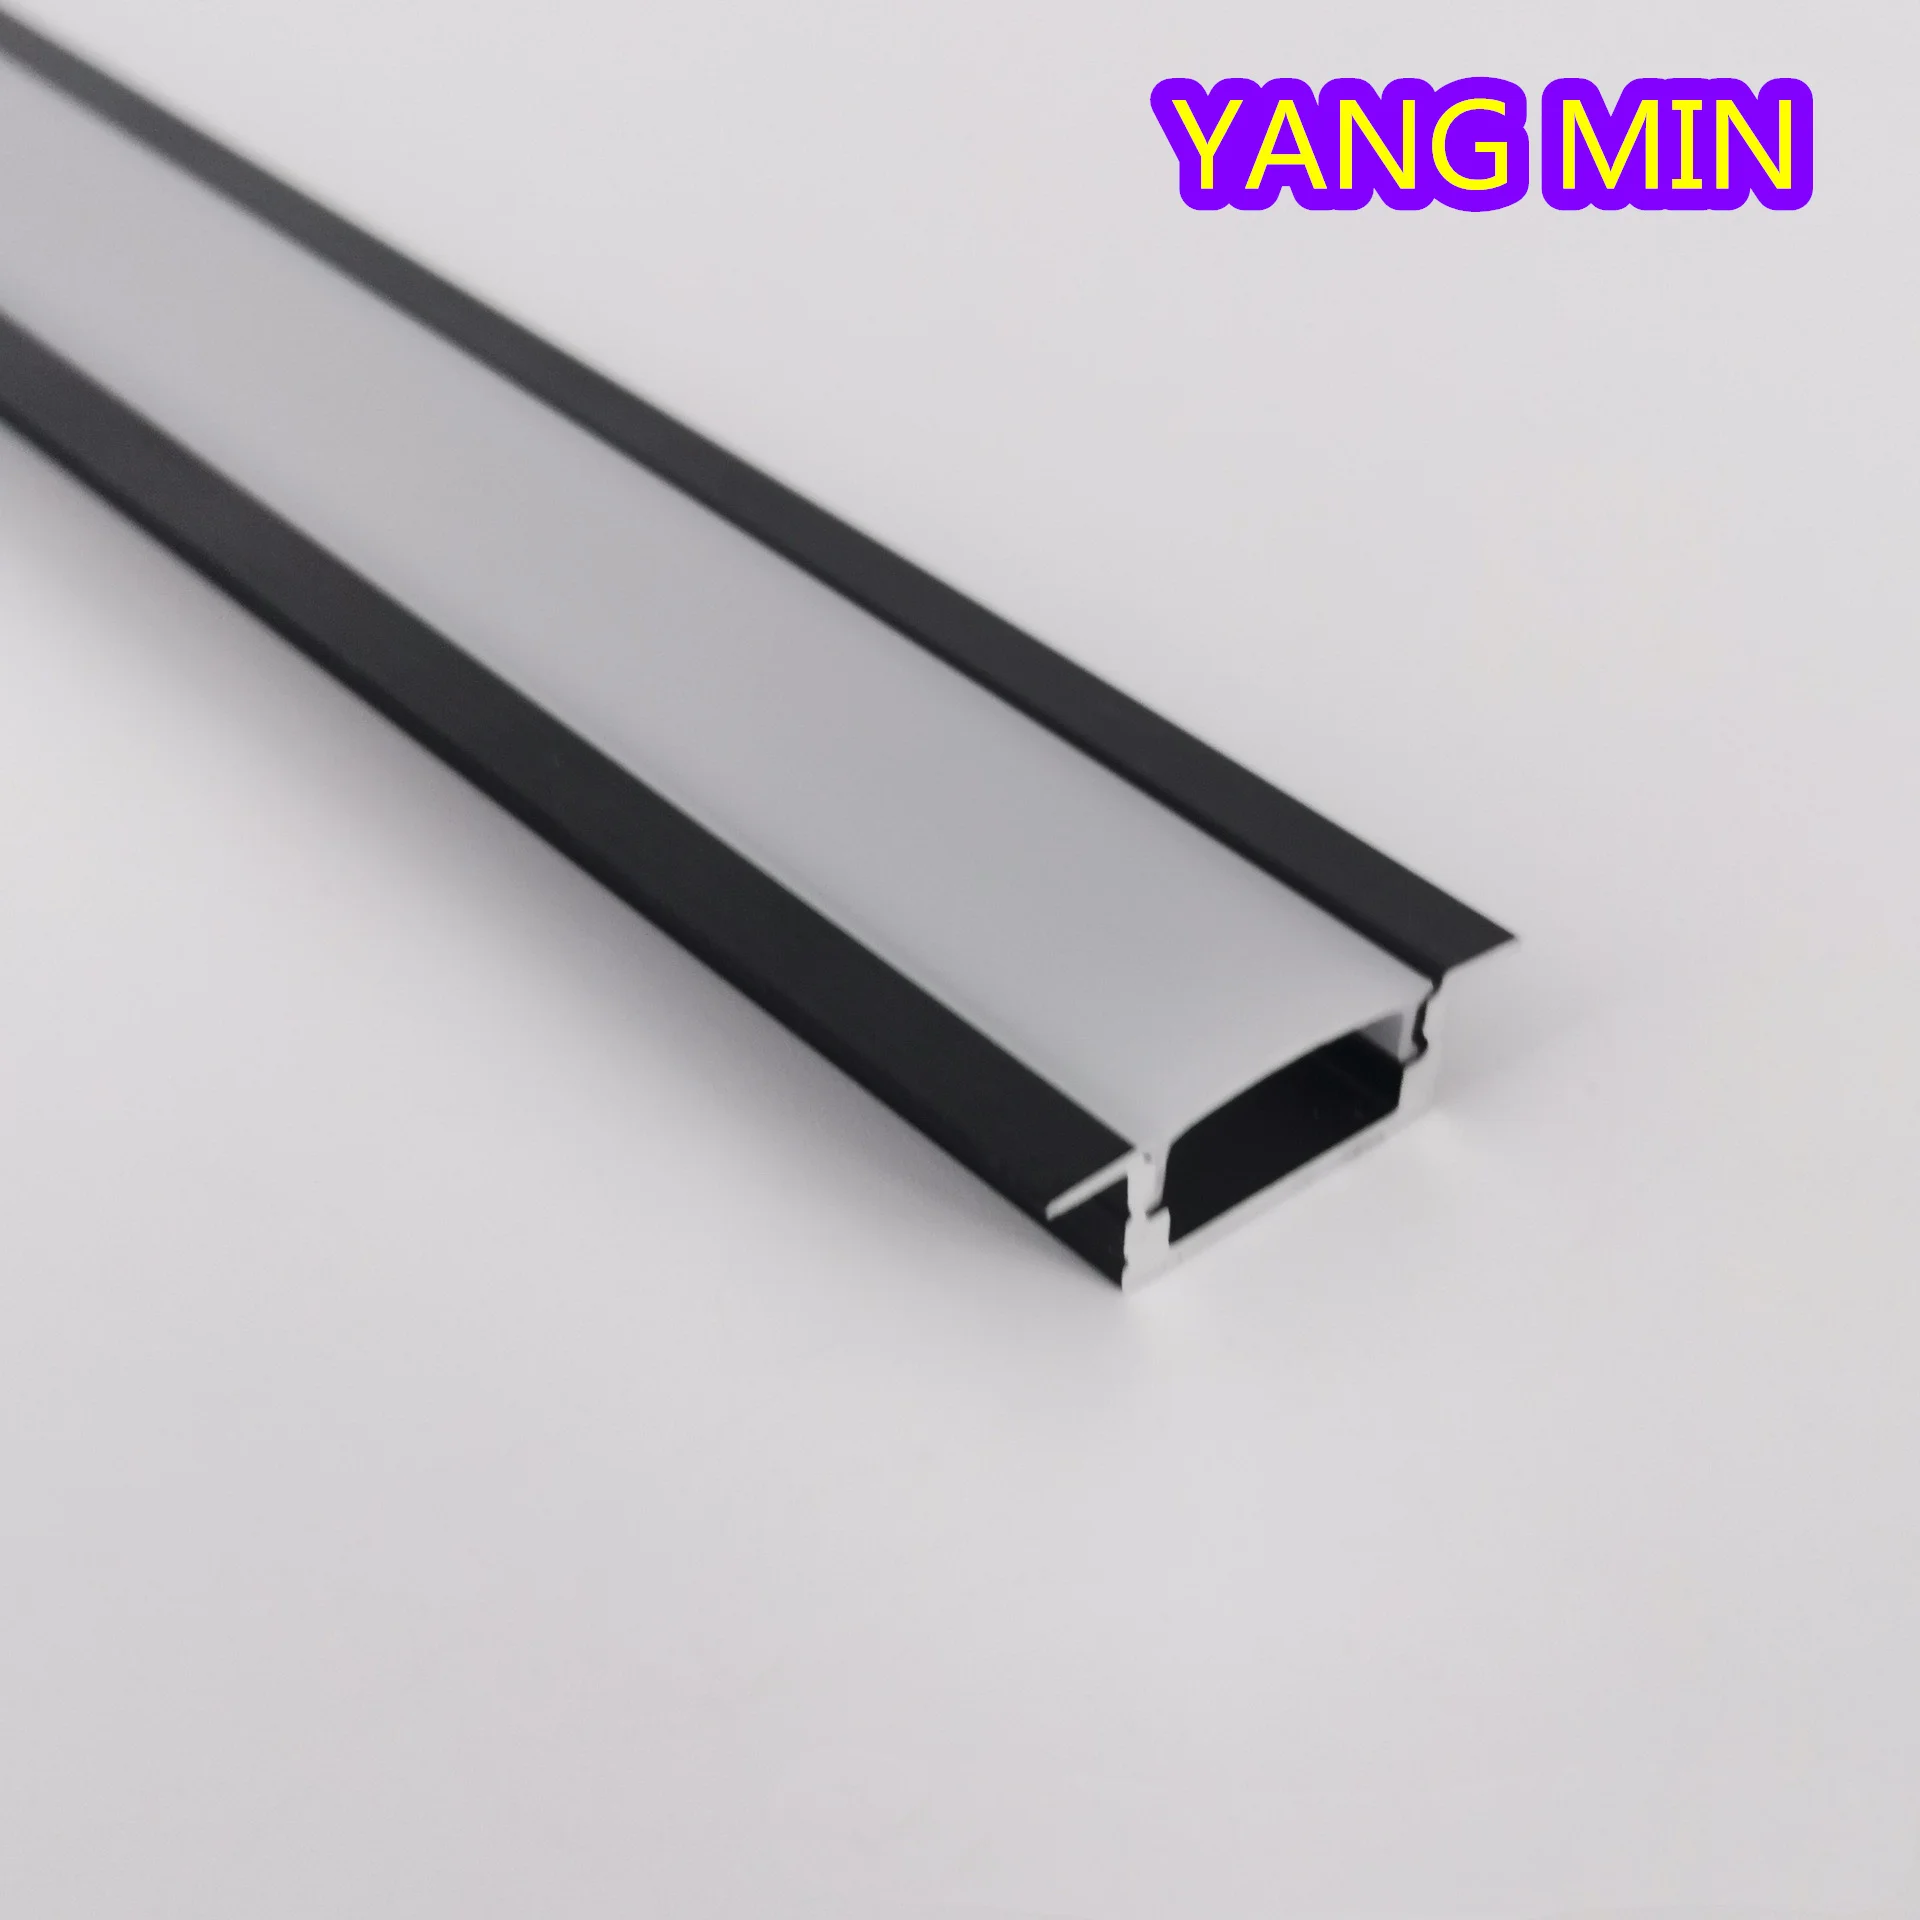 1m/pcs Kitchen Bar Cabinet Ceiling Light Strip Alu U Shape Housing Channel Diffused Cover Recessed Aluminum Extrusion Led Profie led dimmable panel light 220v cct changeable for kitchen bathroom bedroom livingroom ultra thin round square panel ceiling light